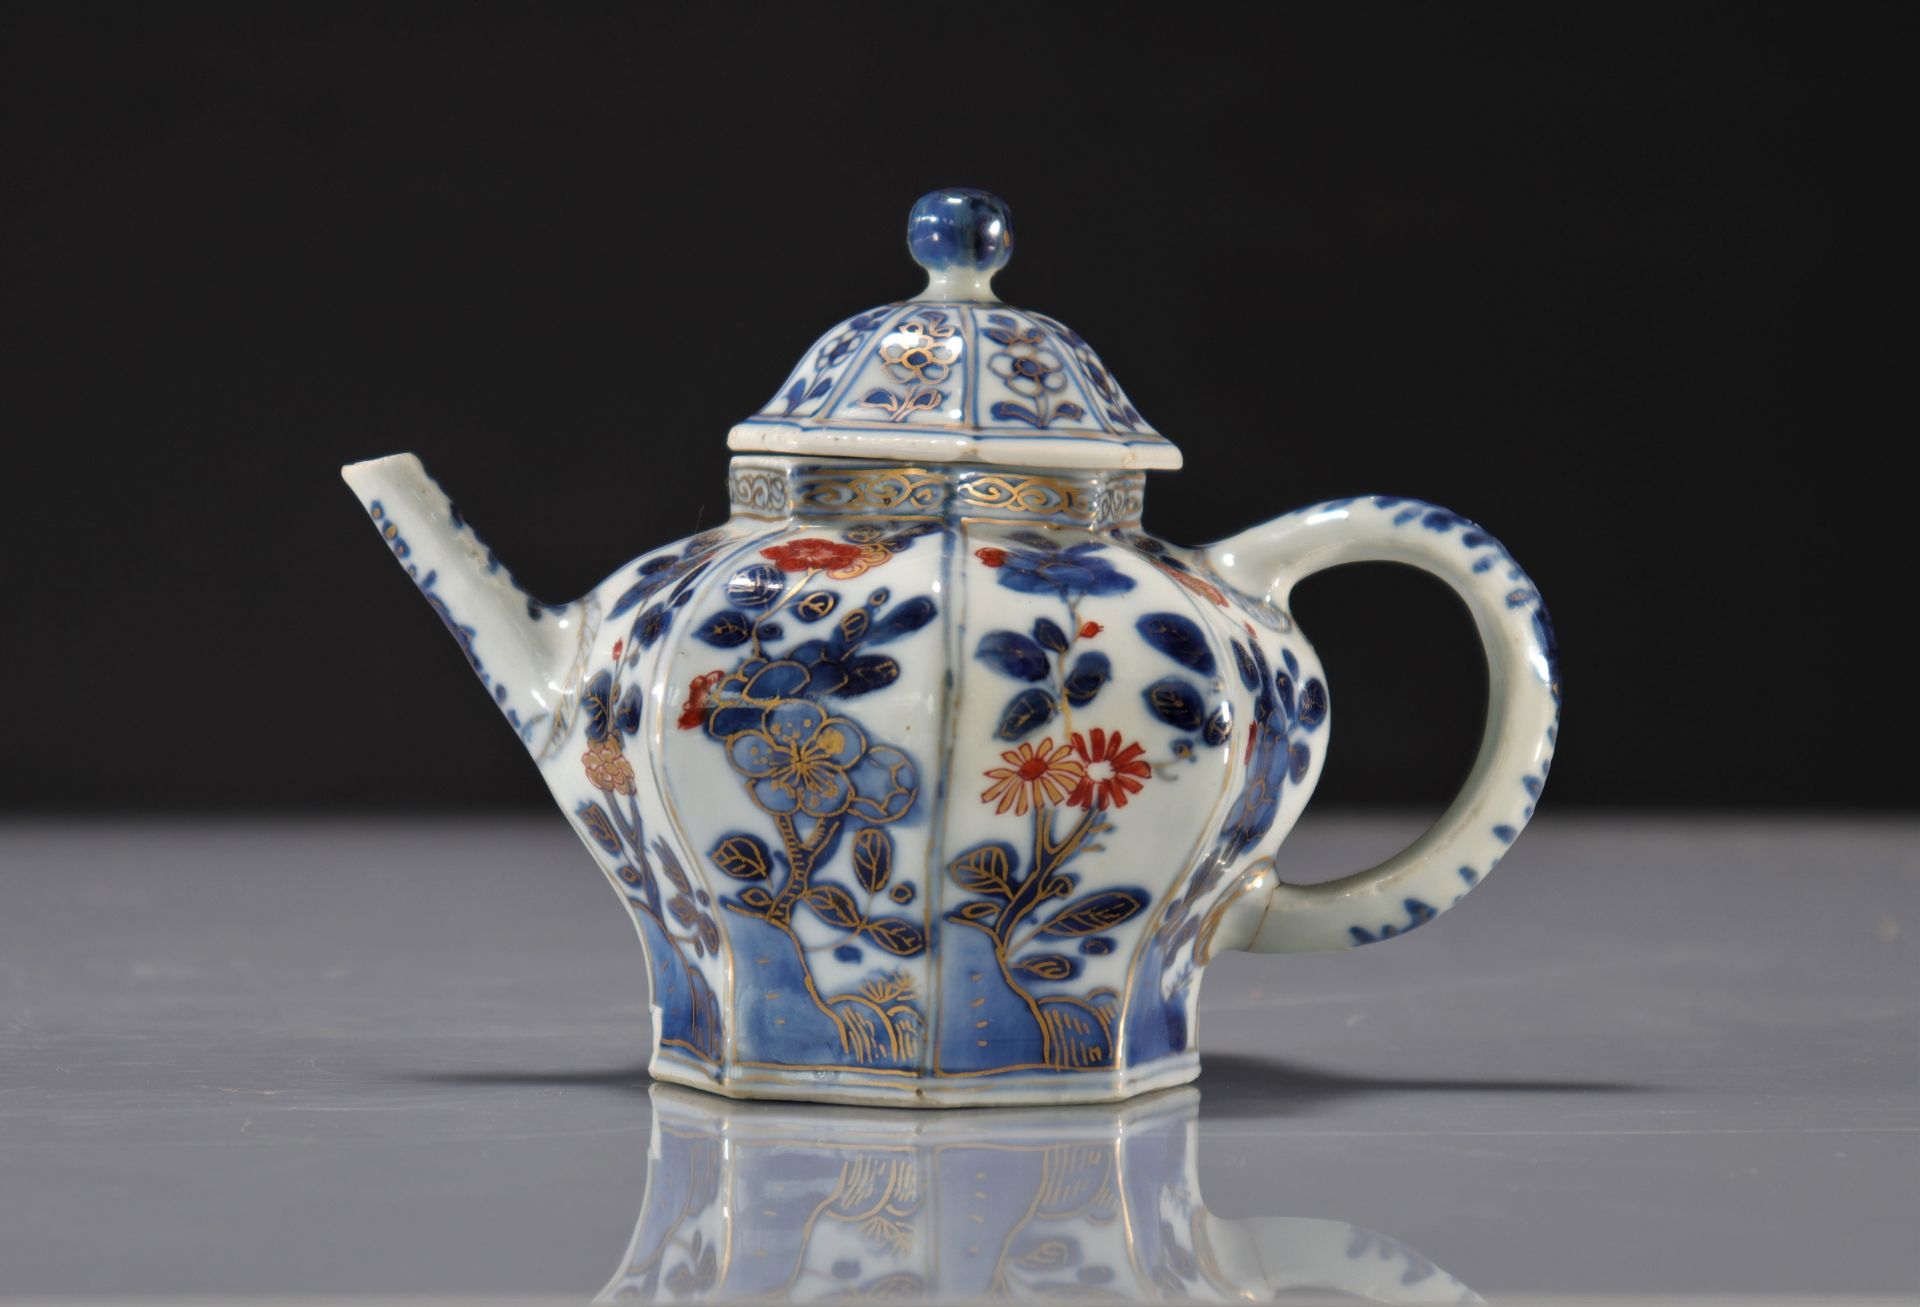 18th century Chinese porcelain teapot - Image 2 of 2